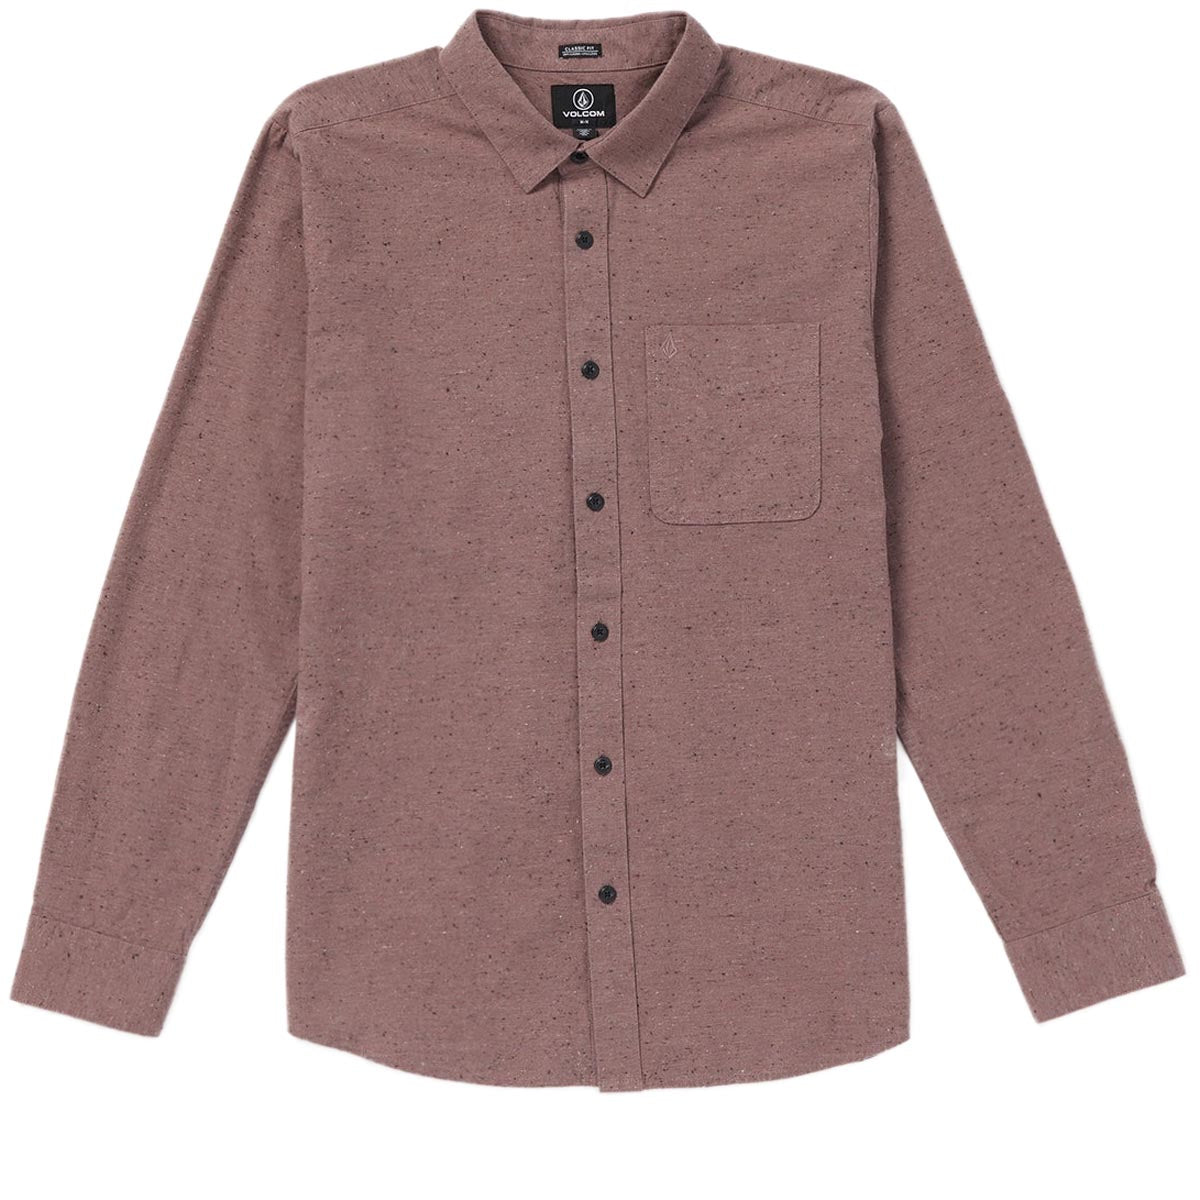 Volcom Date Knight Long Sleeve Shirt - Bordeaux Brown image 1